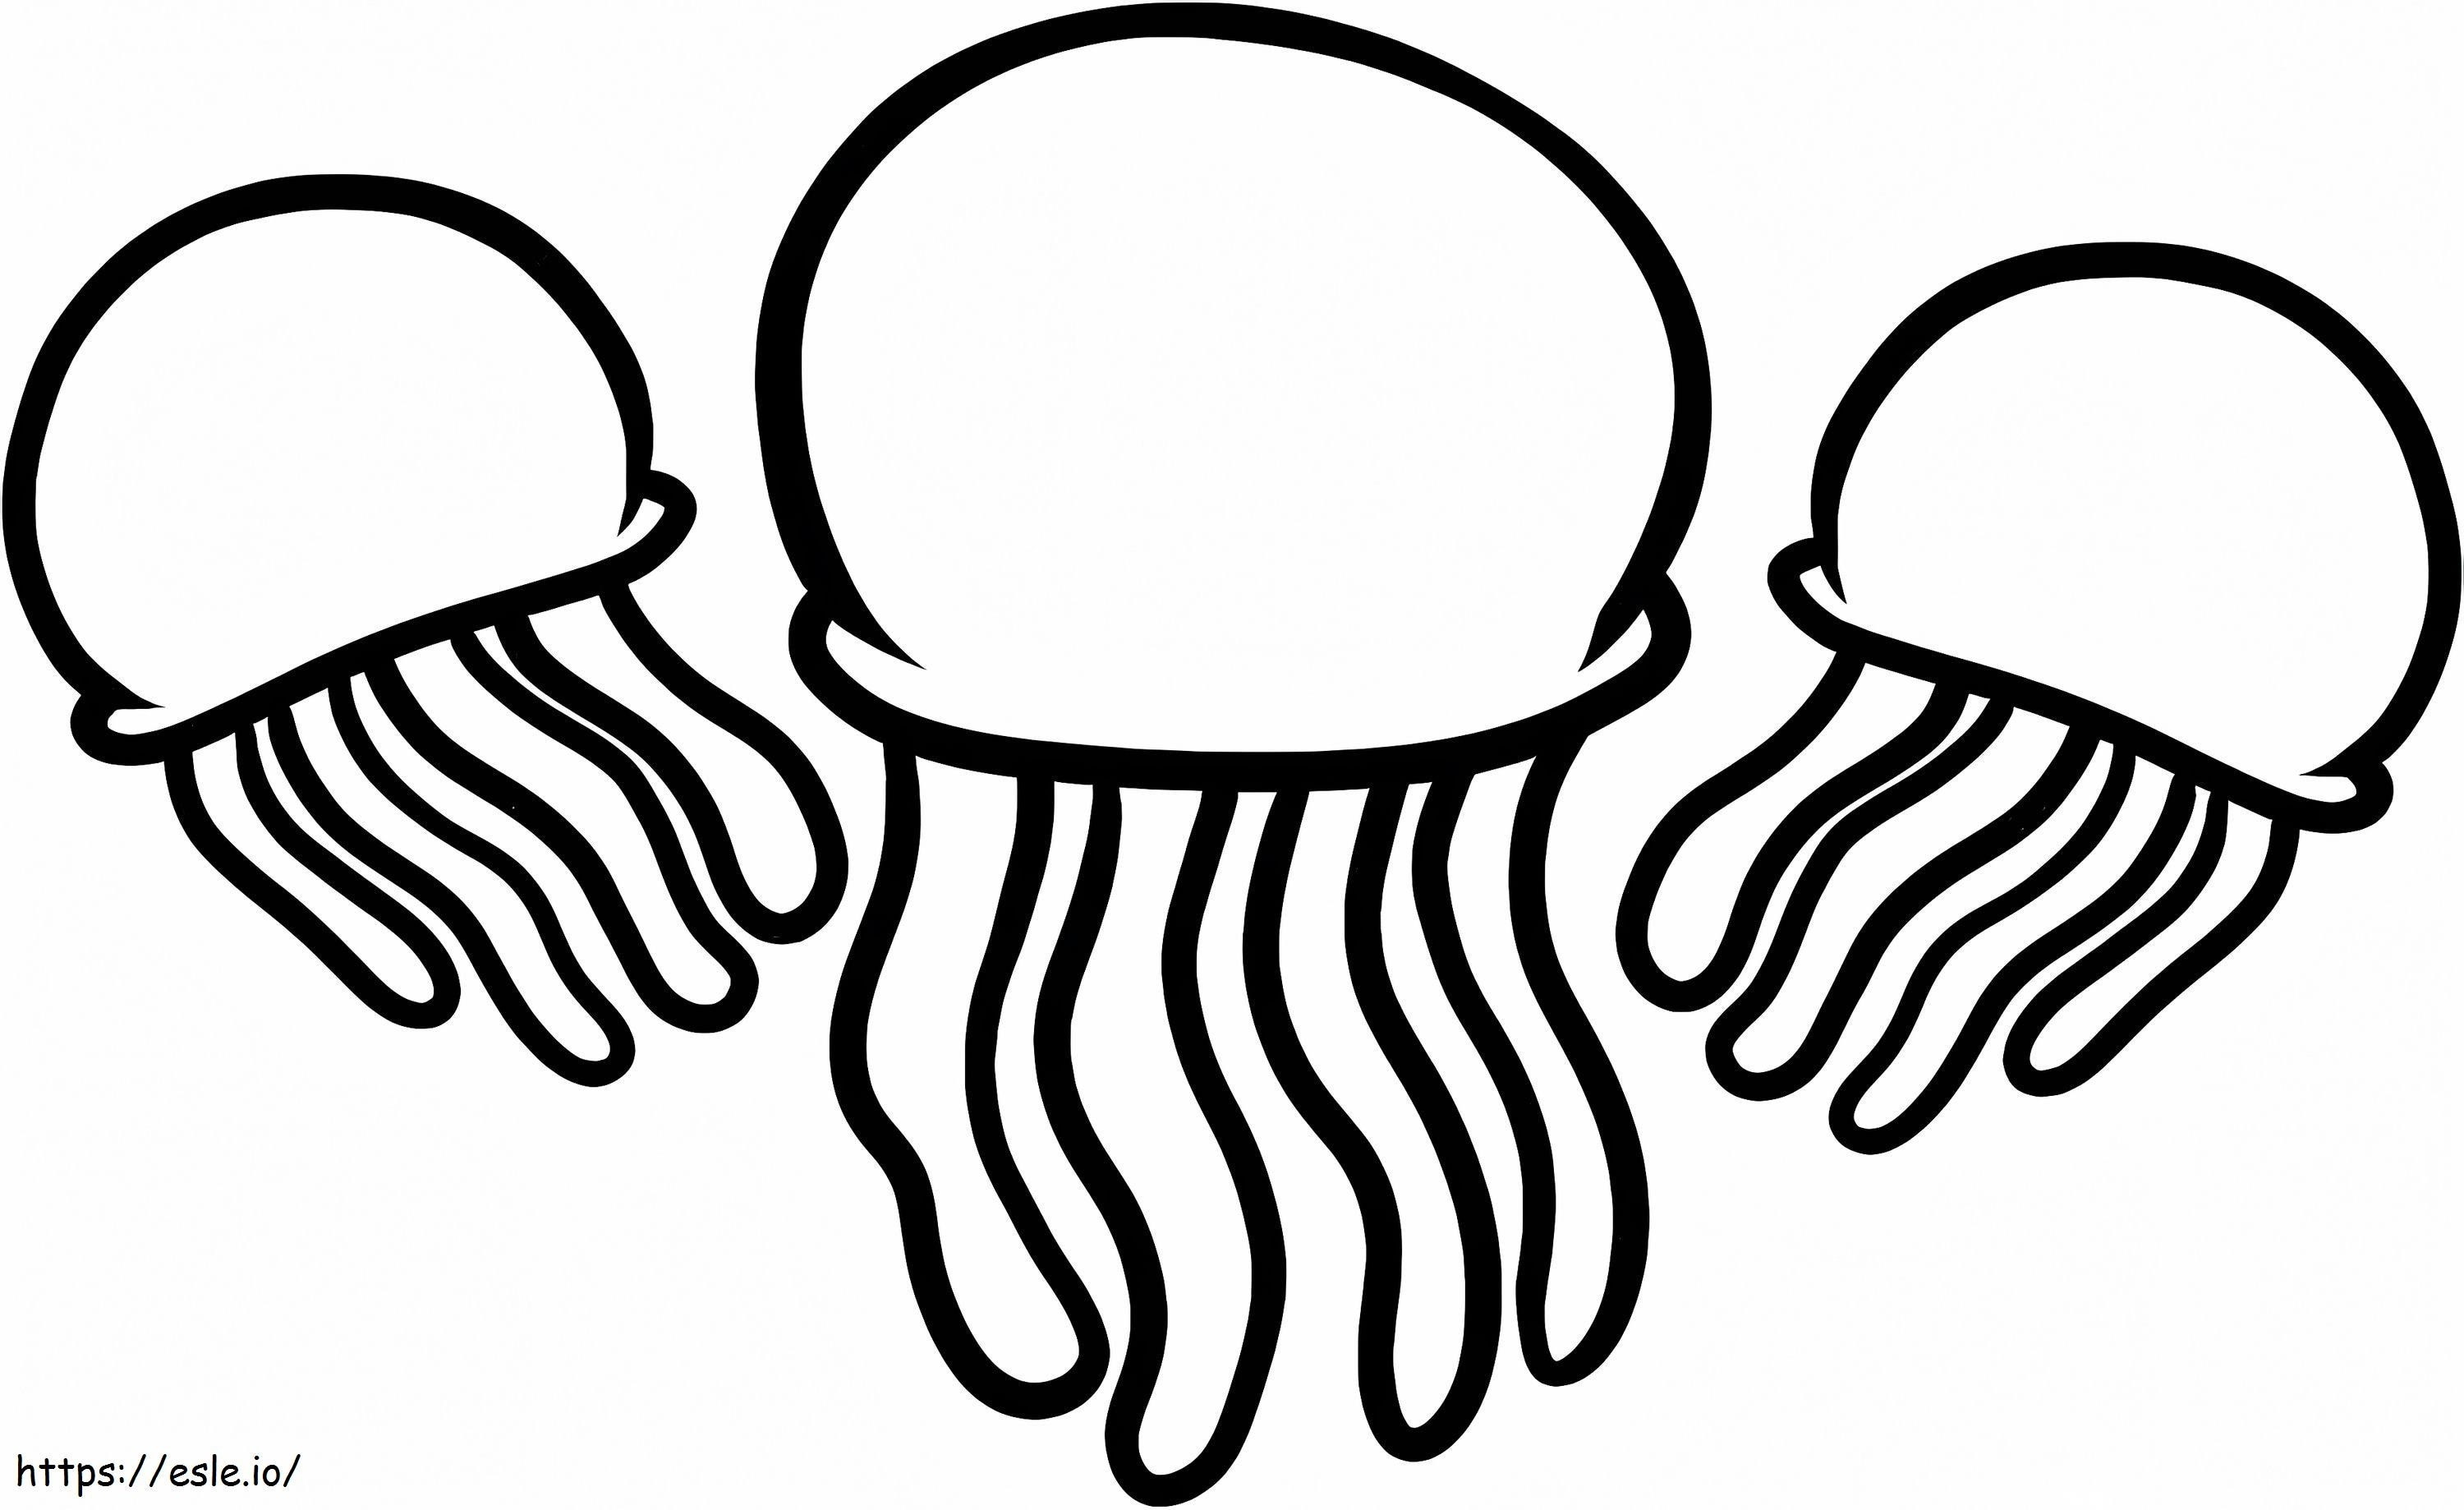 Three Jellyfish coloring page